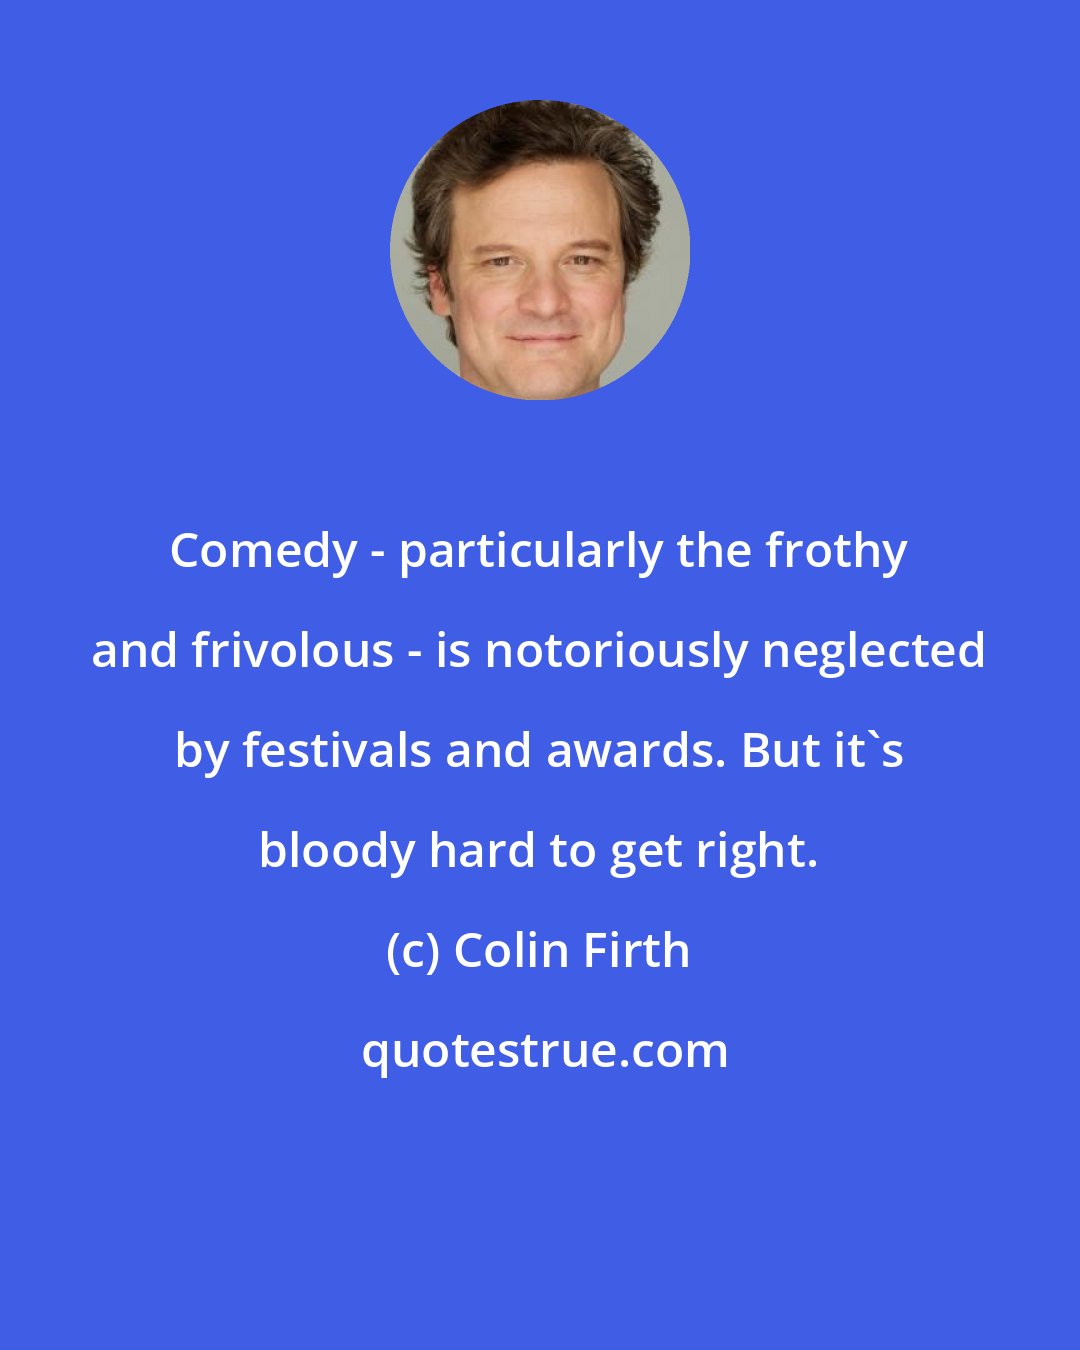 Colin Firth: Comedy - particularly the frothy and frivolous - is notoriously neglected by festivals and awards. But it's bloody hard to get right.